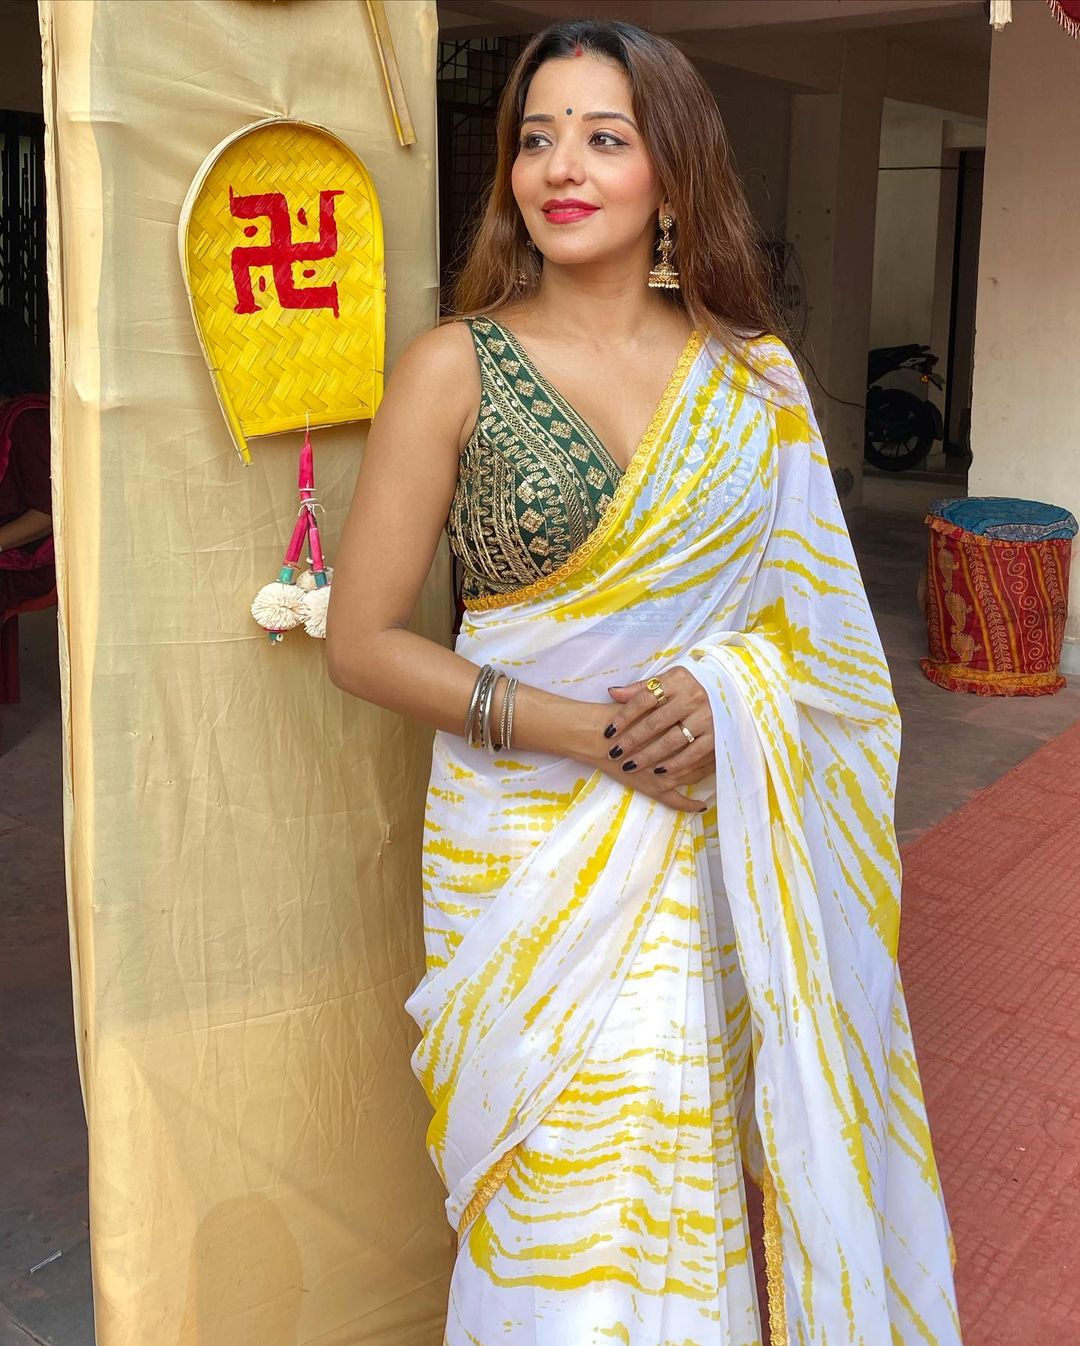 Monalisa looks flawless in the white and yellow saree